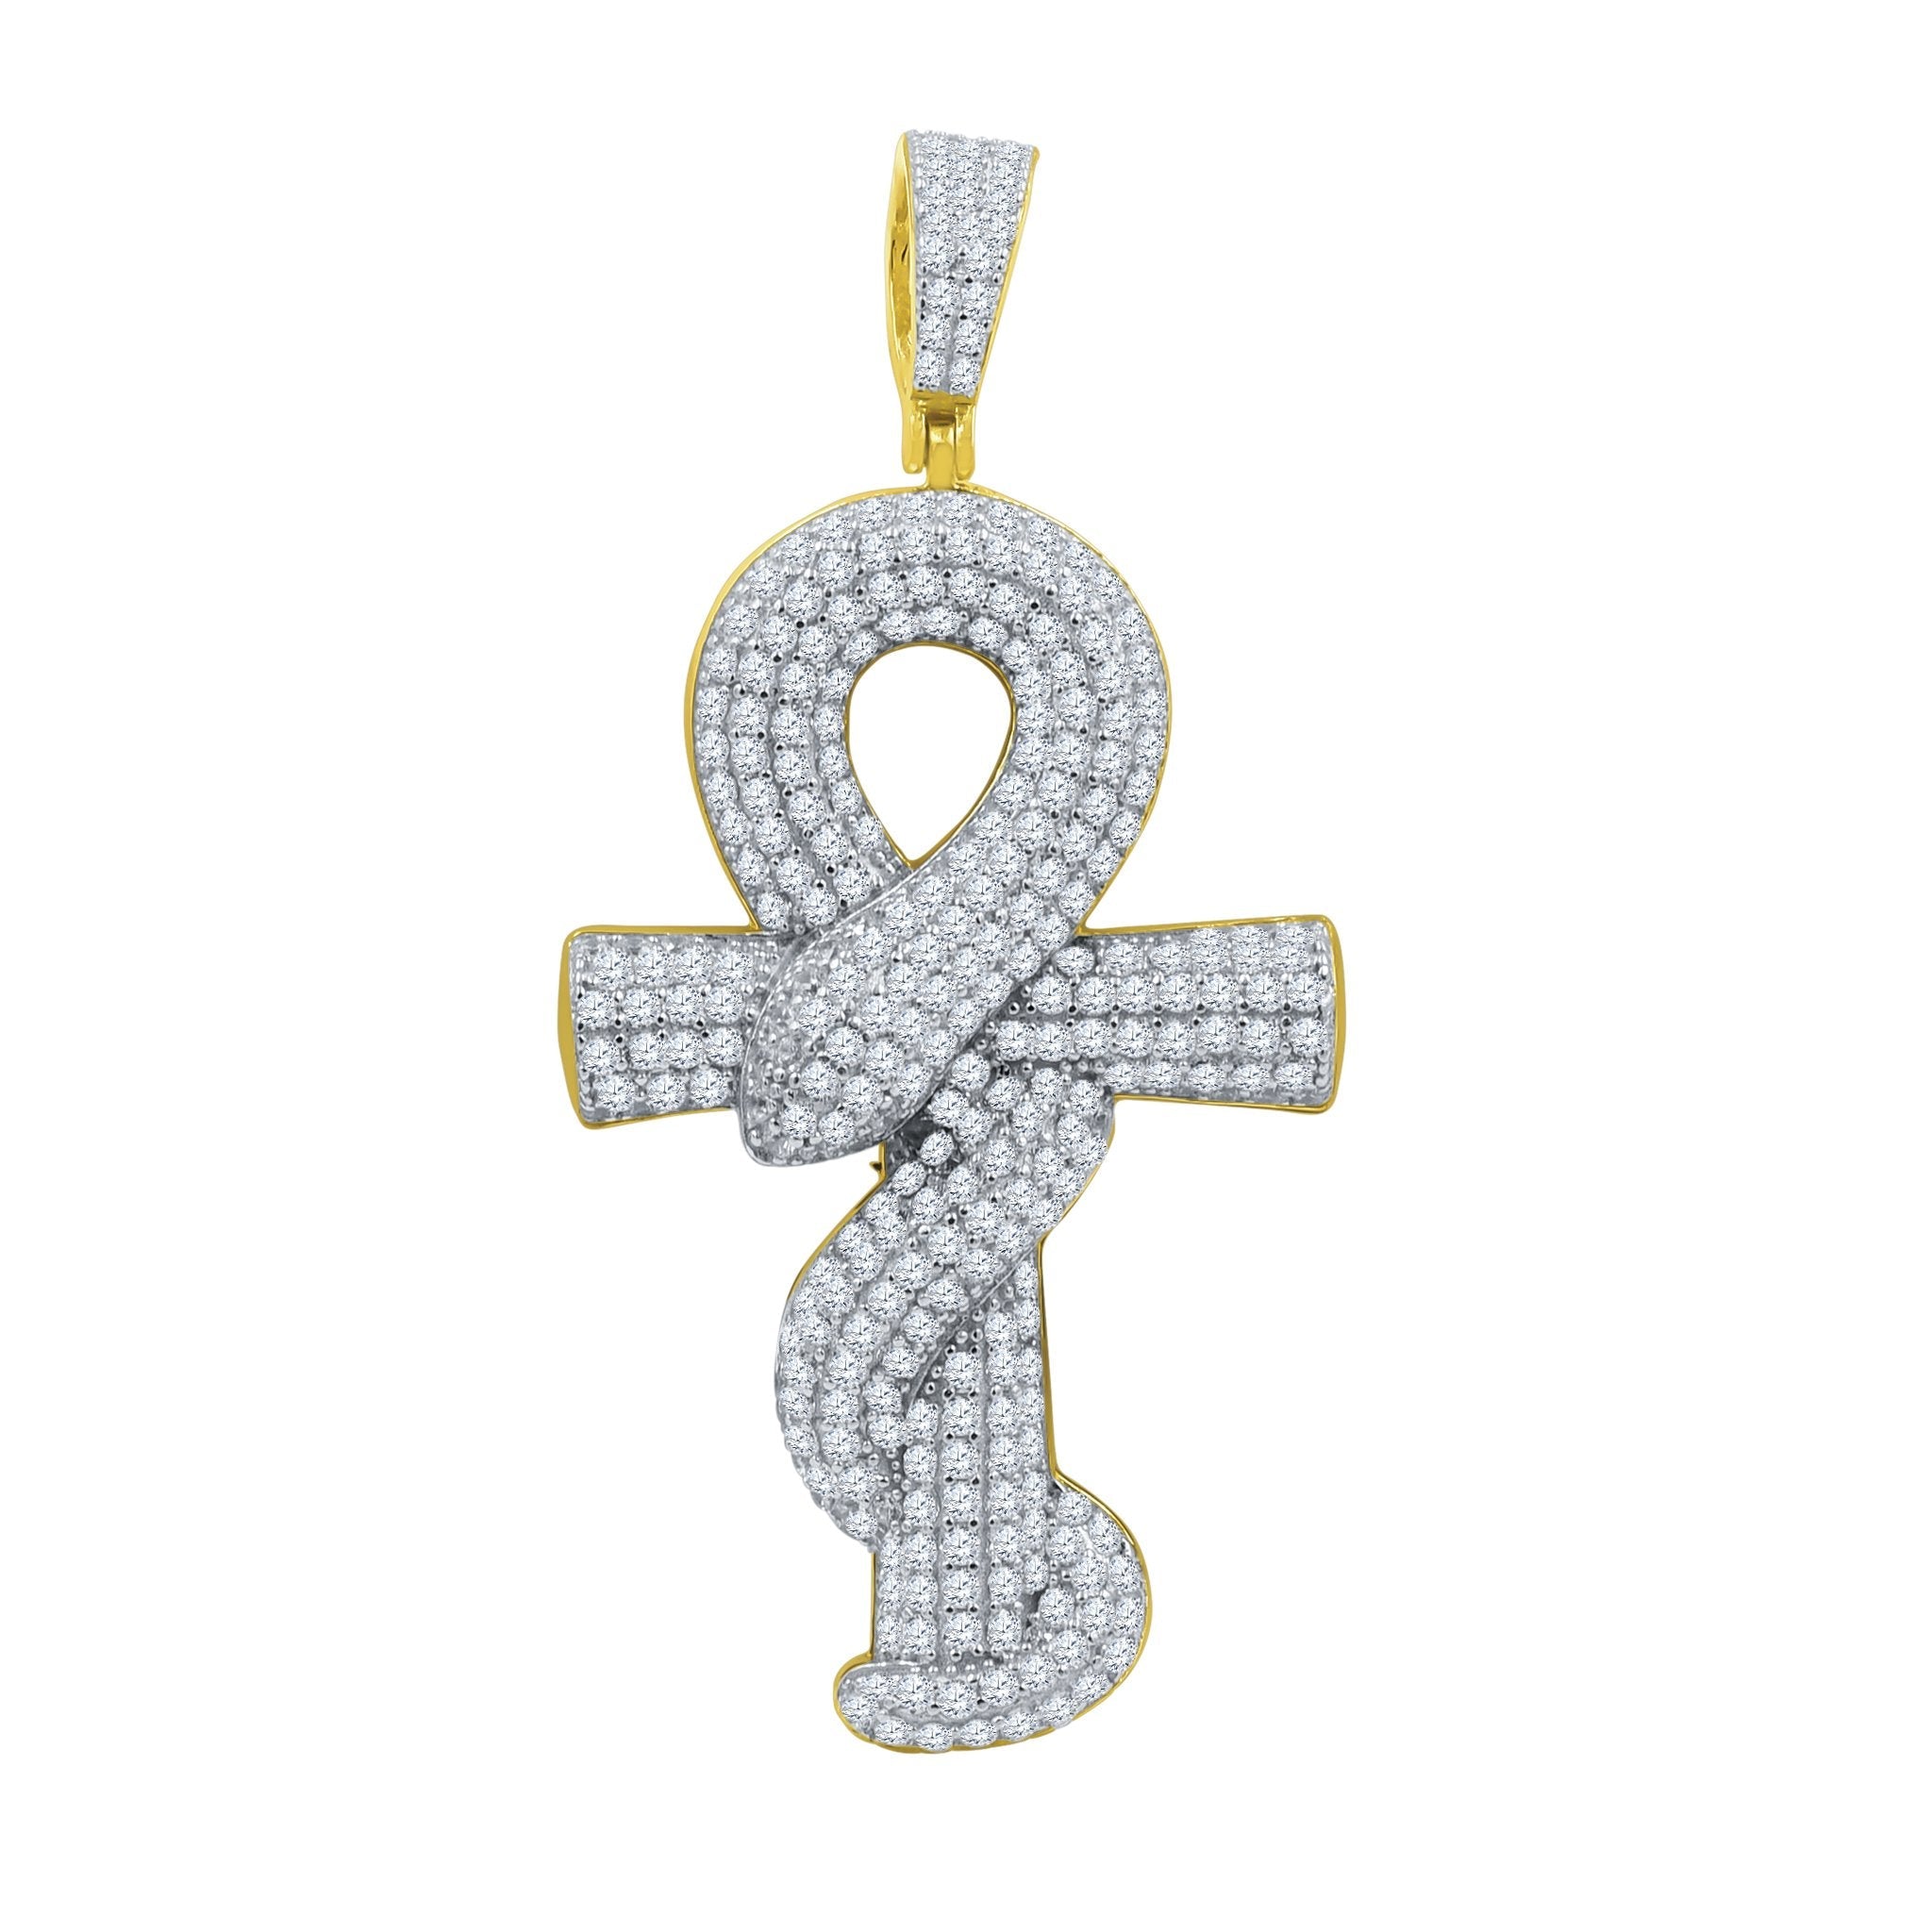 Apostolic Double Cross Pendant with CZ Stones - 925 Sterling Silver, 68mm Length, 13g Weight Bijou Her